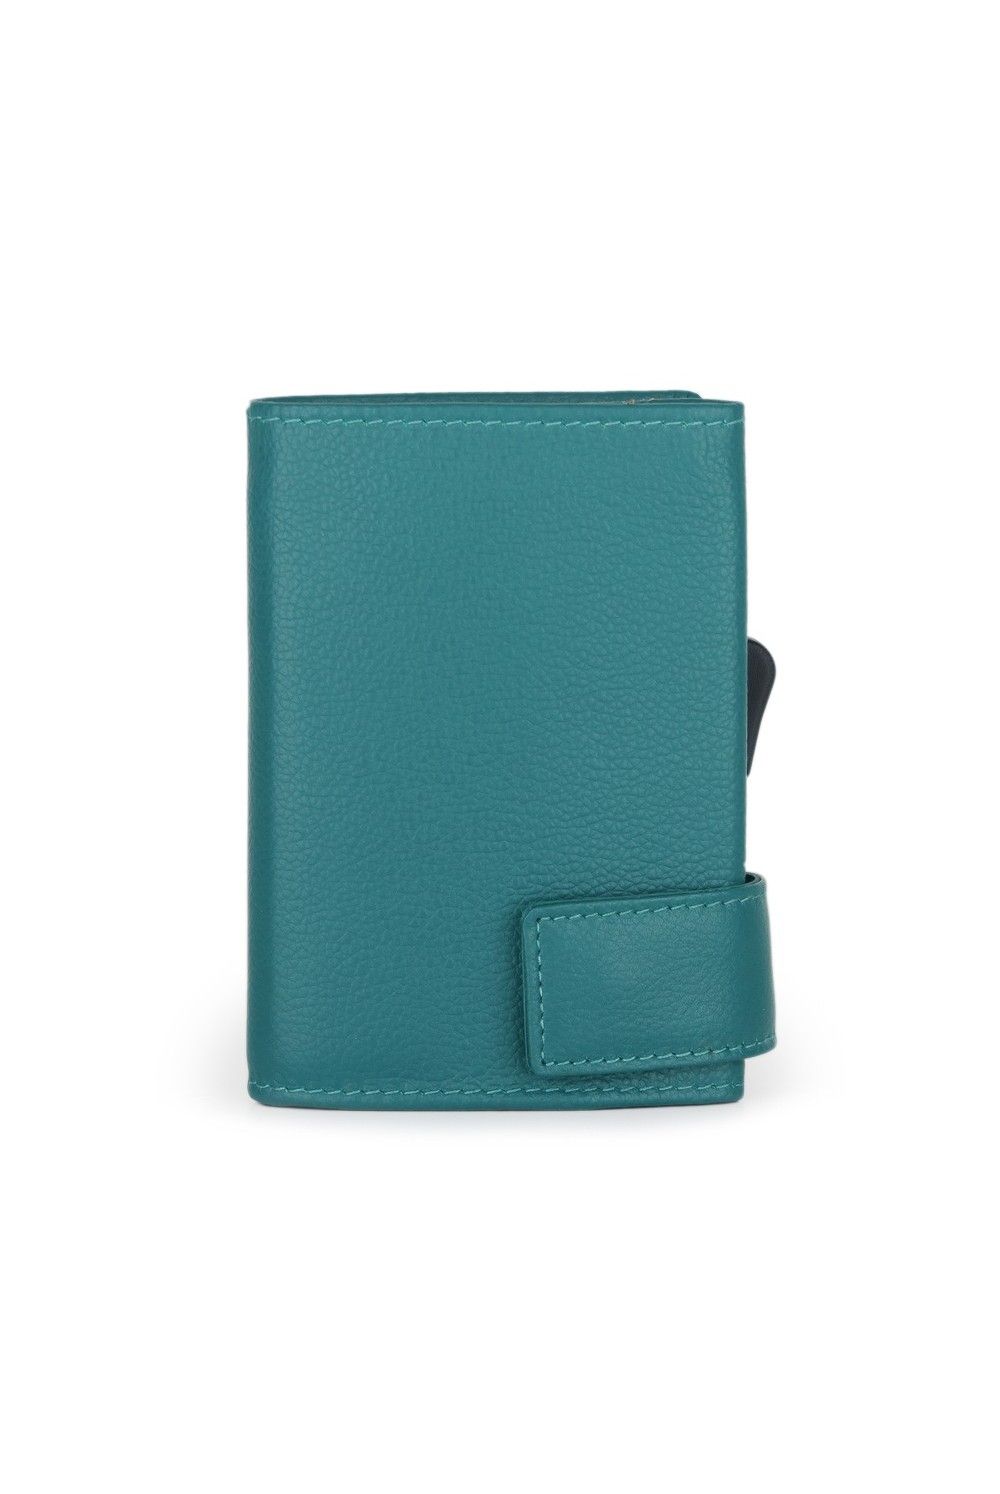 Porte-cartes SecWal DK Leather Turquoise